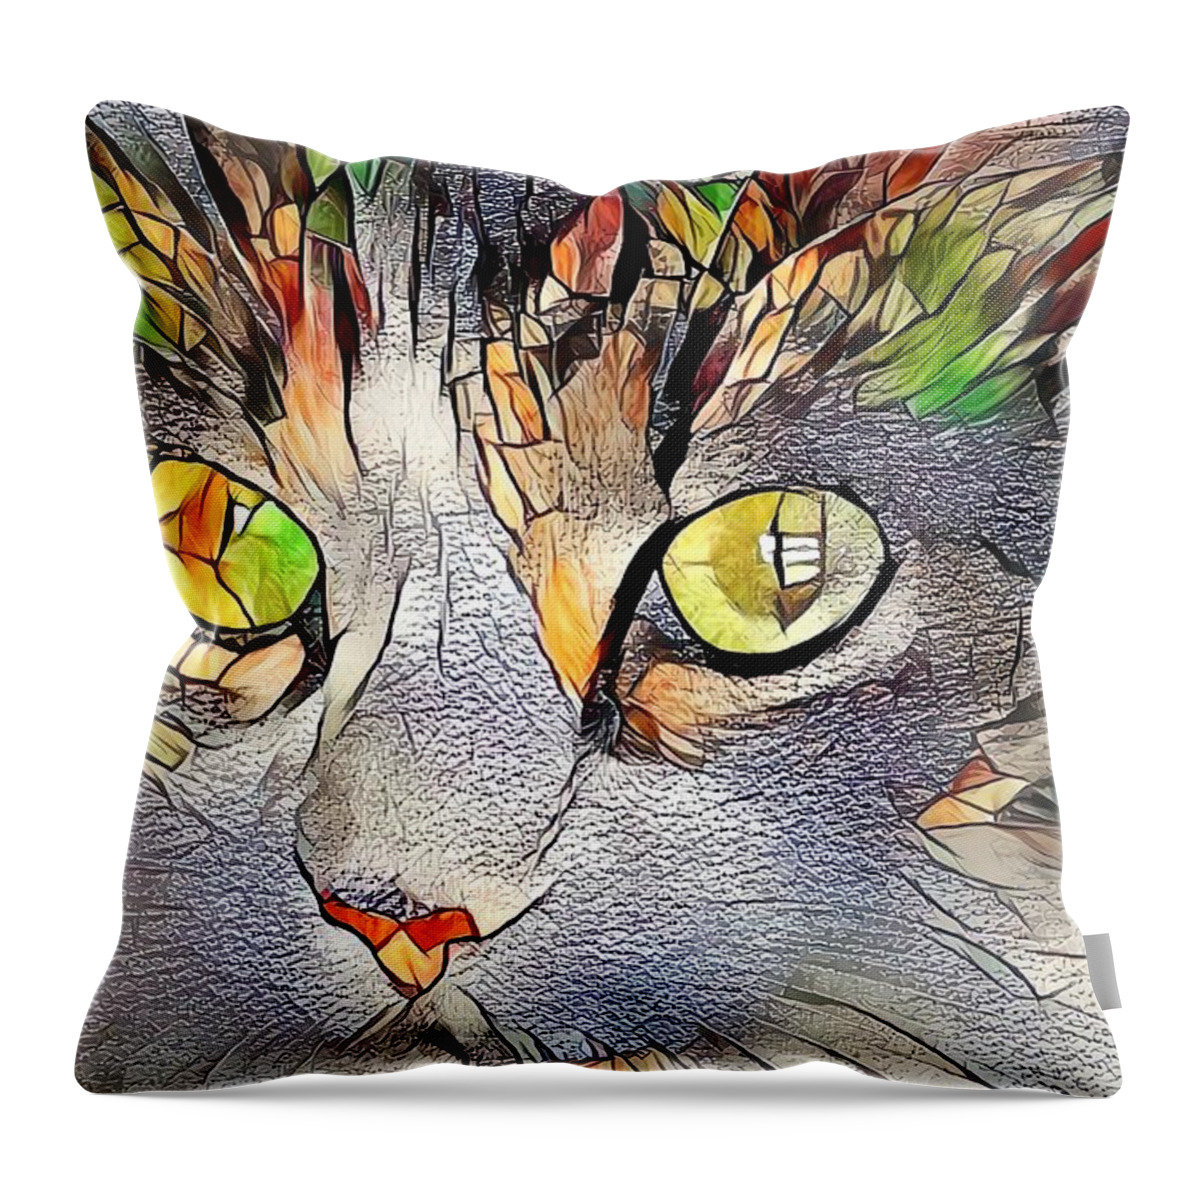 Glass Throw Pillow featuring the digital art Stained Glass Cat Portrait Golden Orange by Don Northup